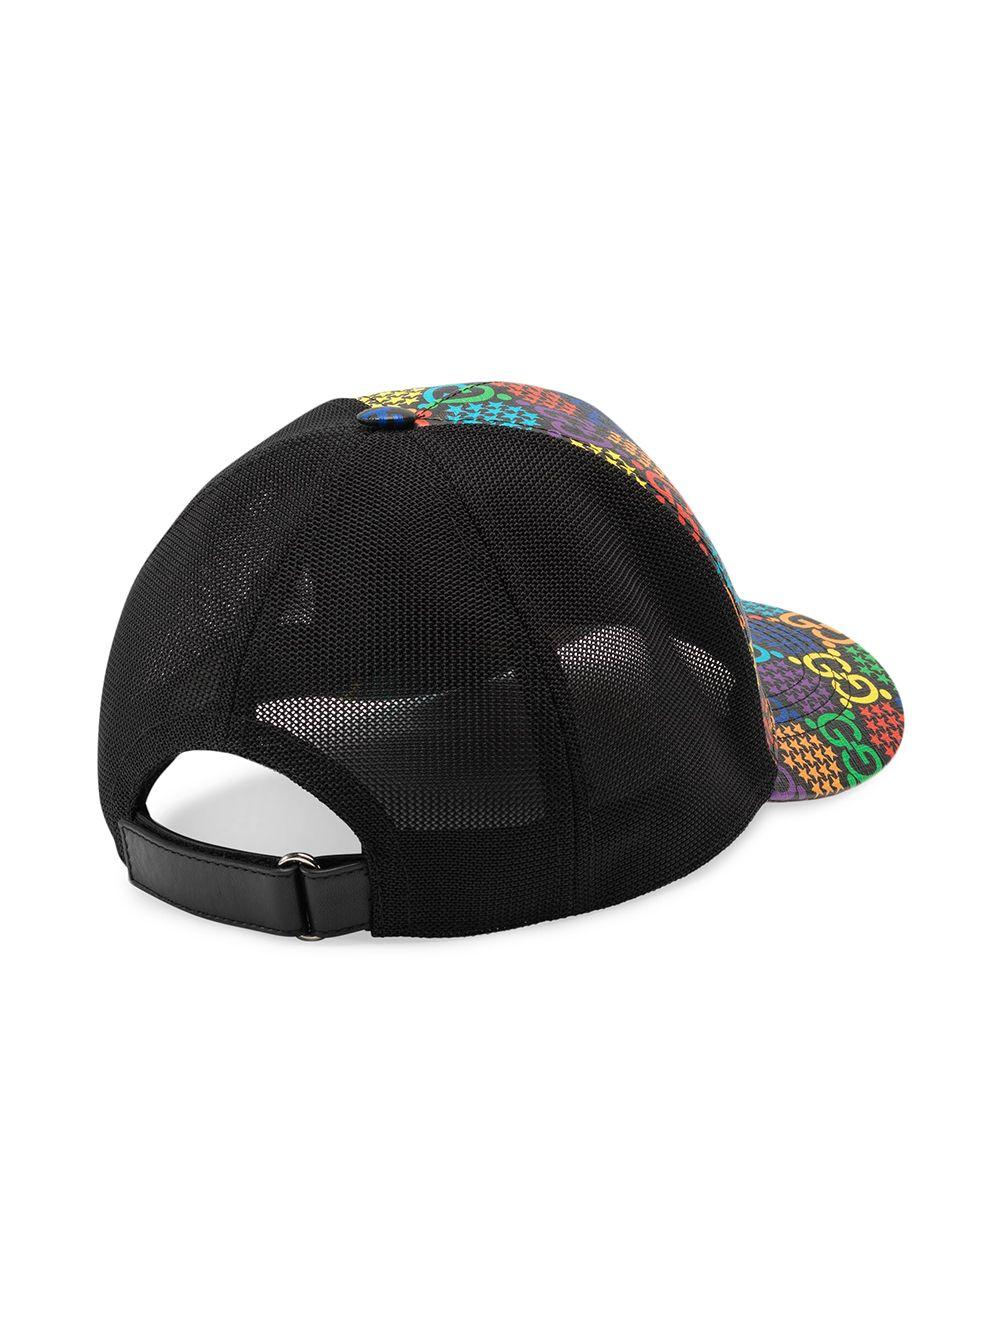 Gucci Canvas GG Psychedelic Baseball Hat in Black for Men - Lyst